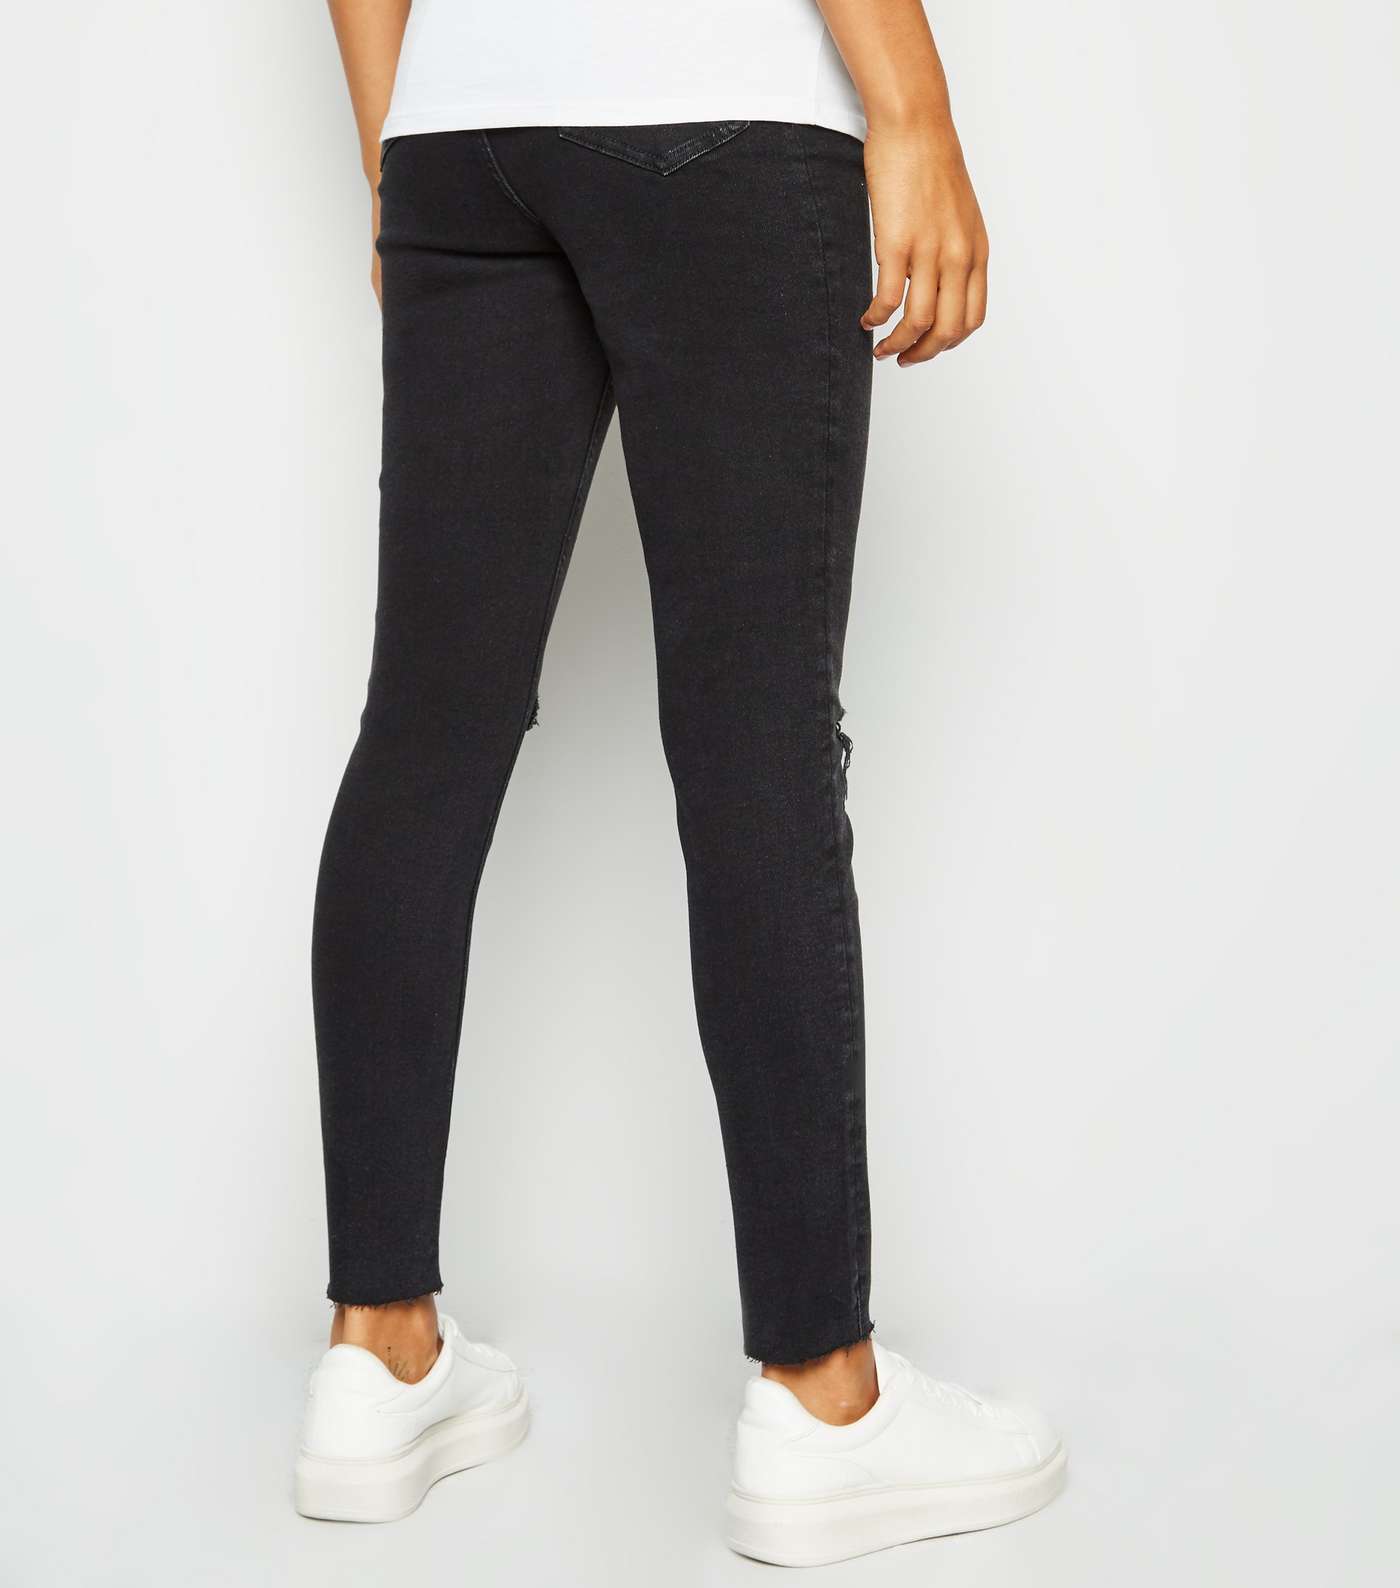 Maternity Black Ripped Knee Under Bump Skinny Jeans Image 3